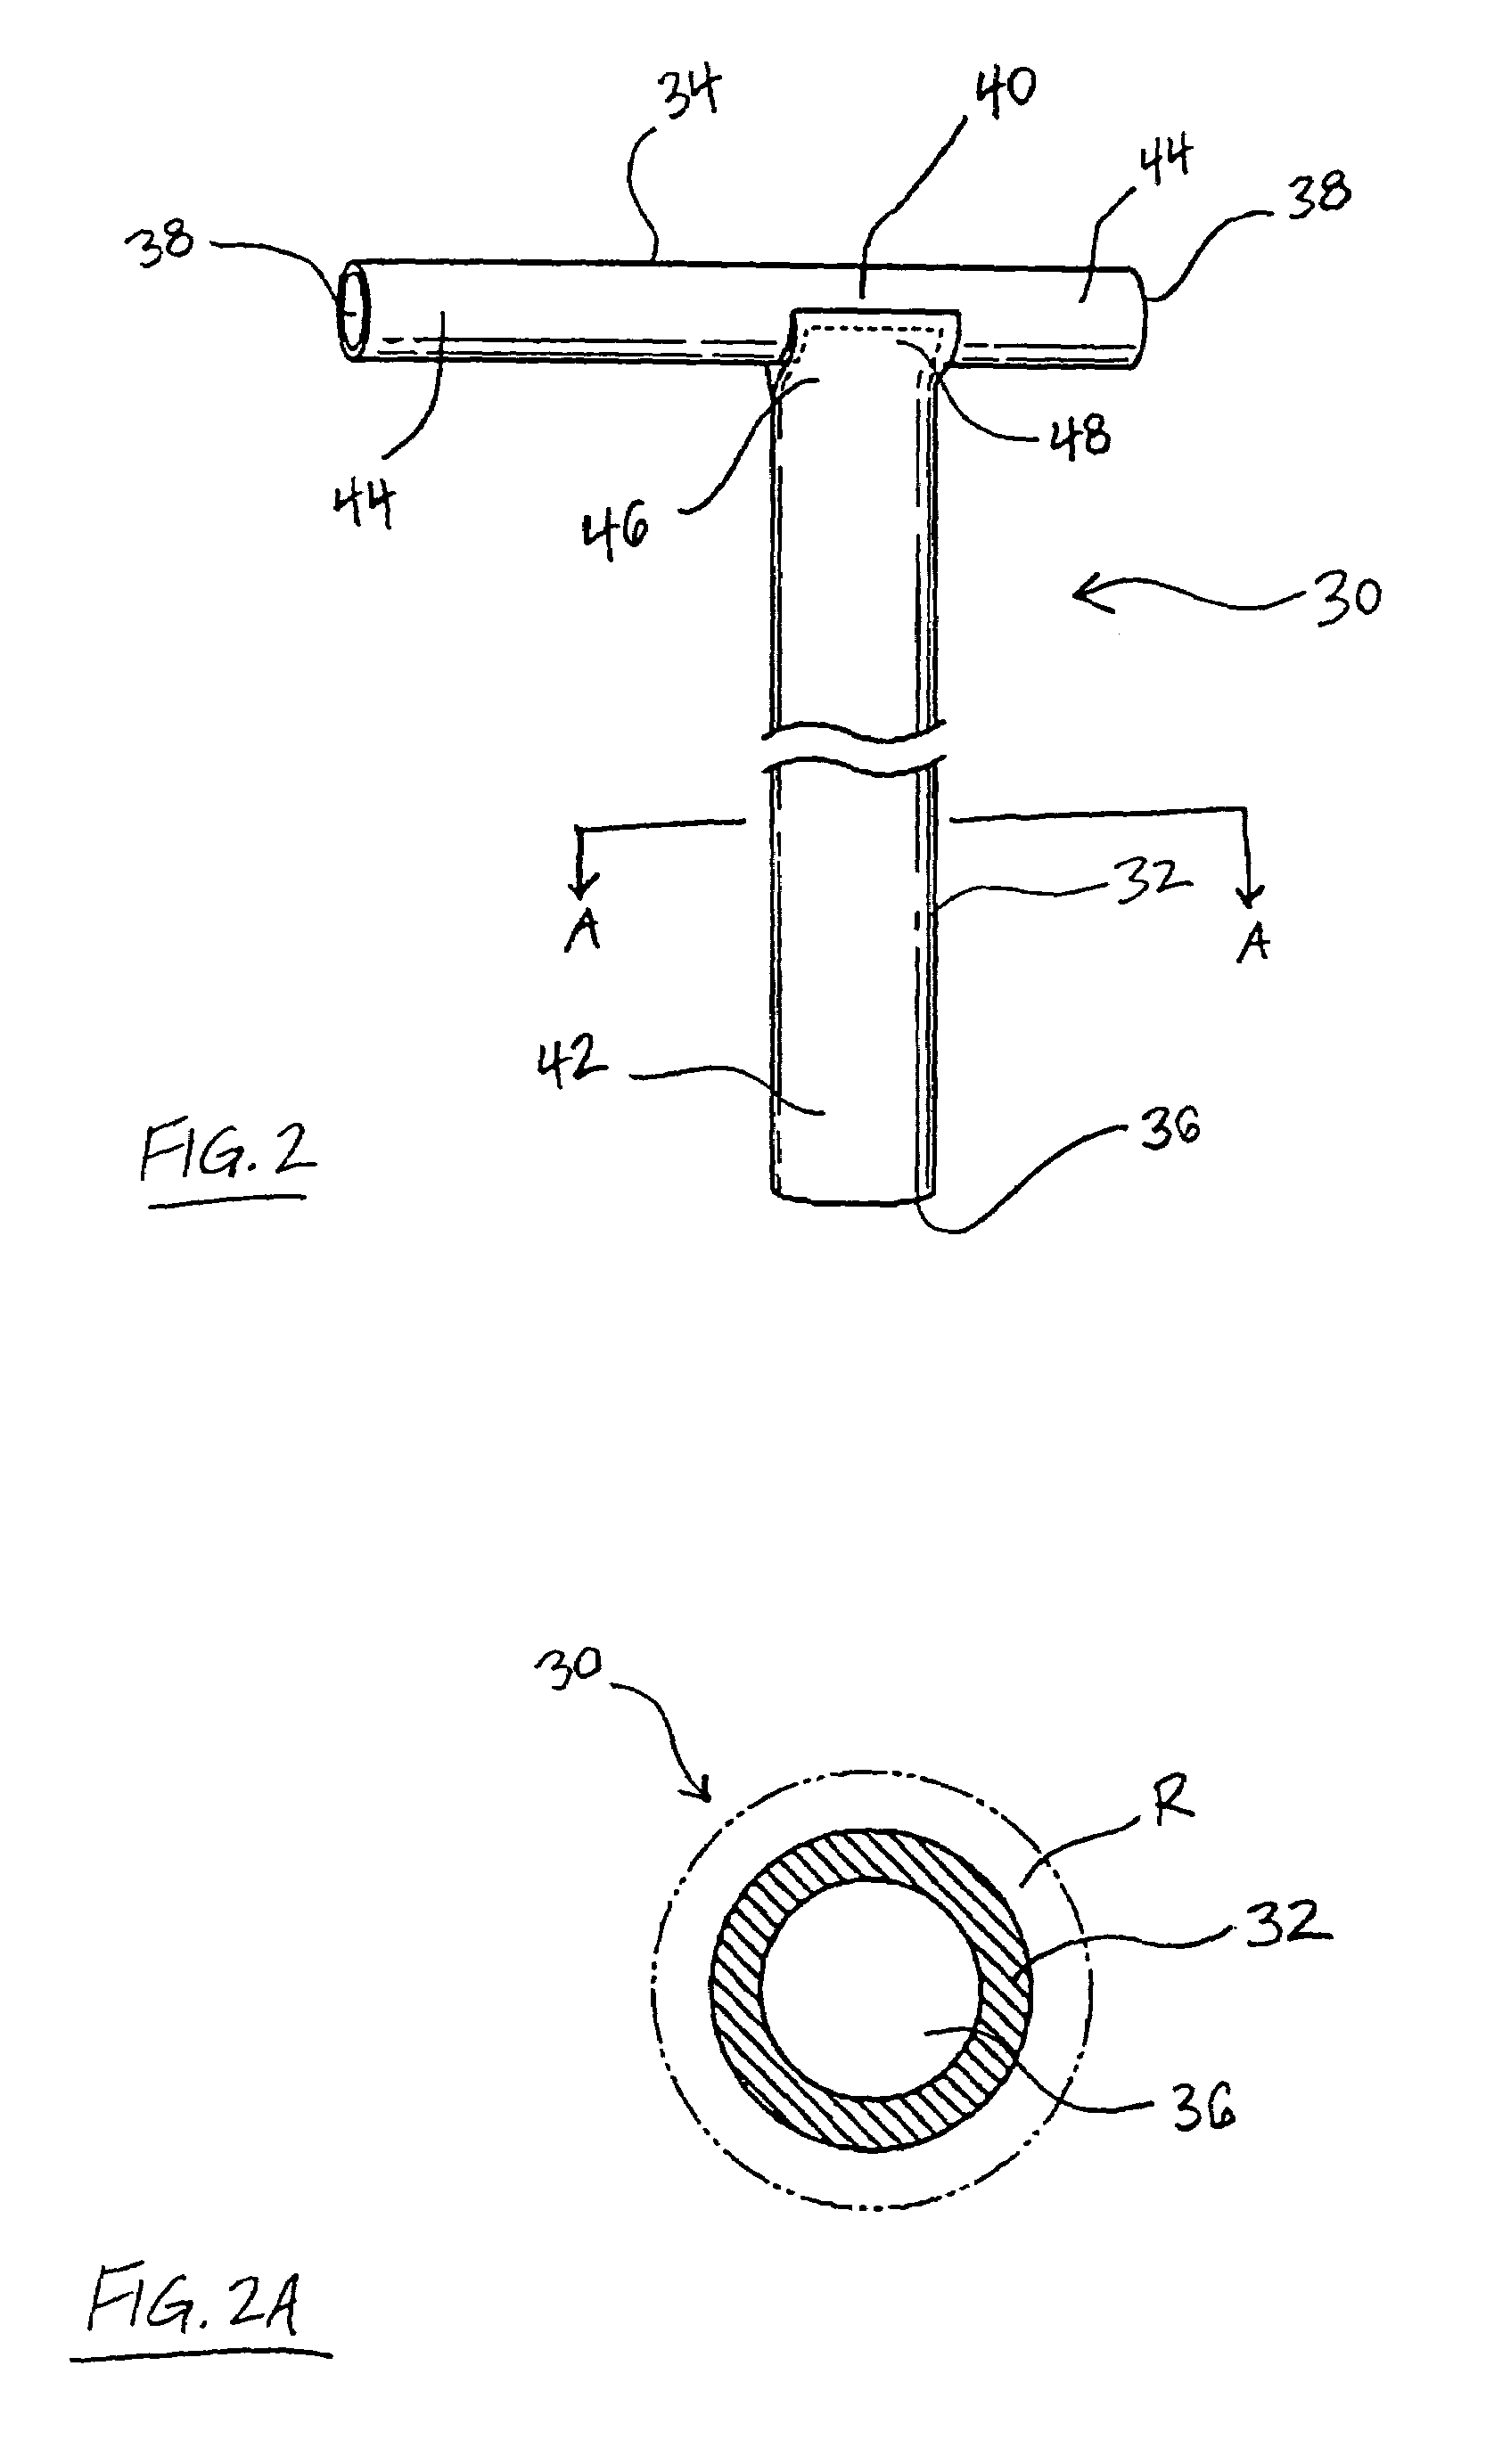 Manufacturing conduits for use in placing a target vessel in fluid communication with a source of blood